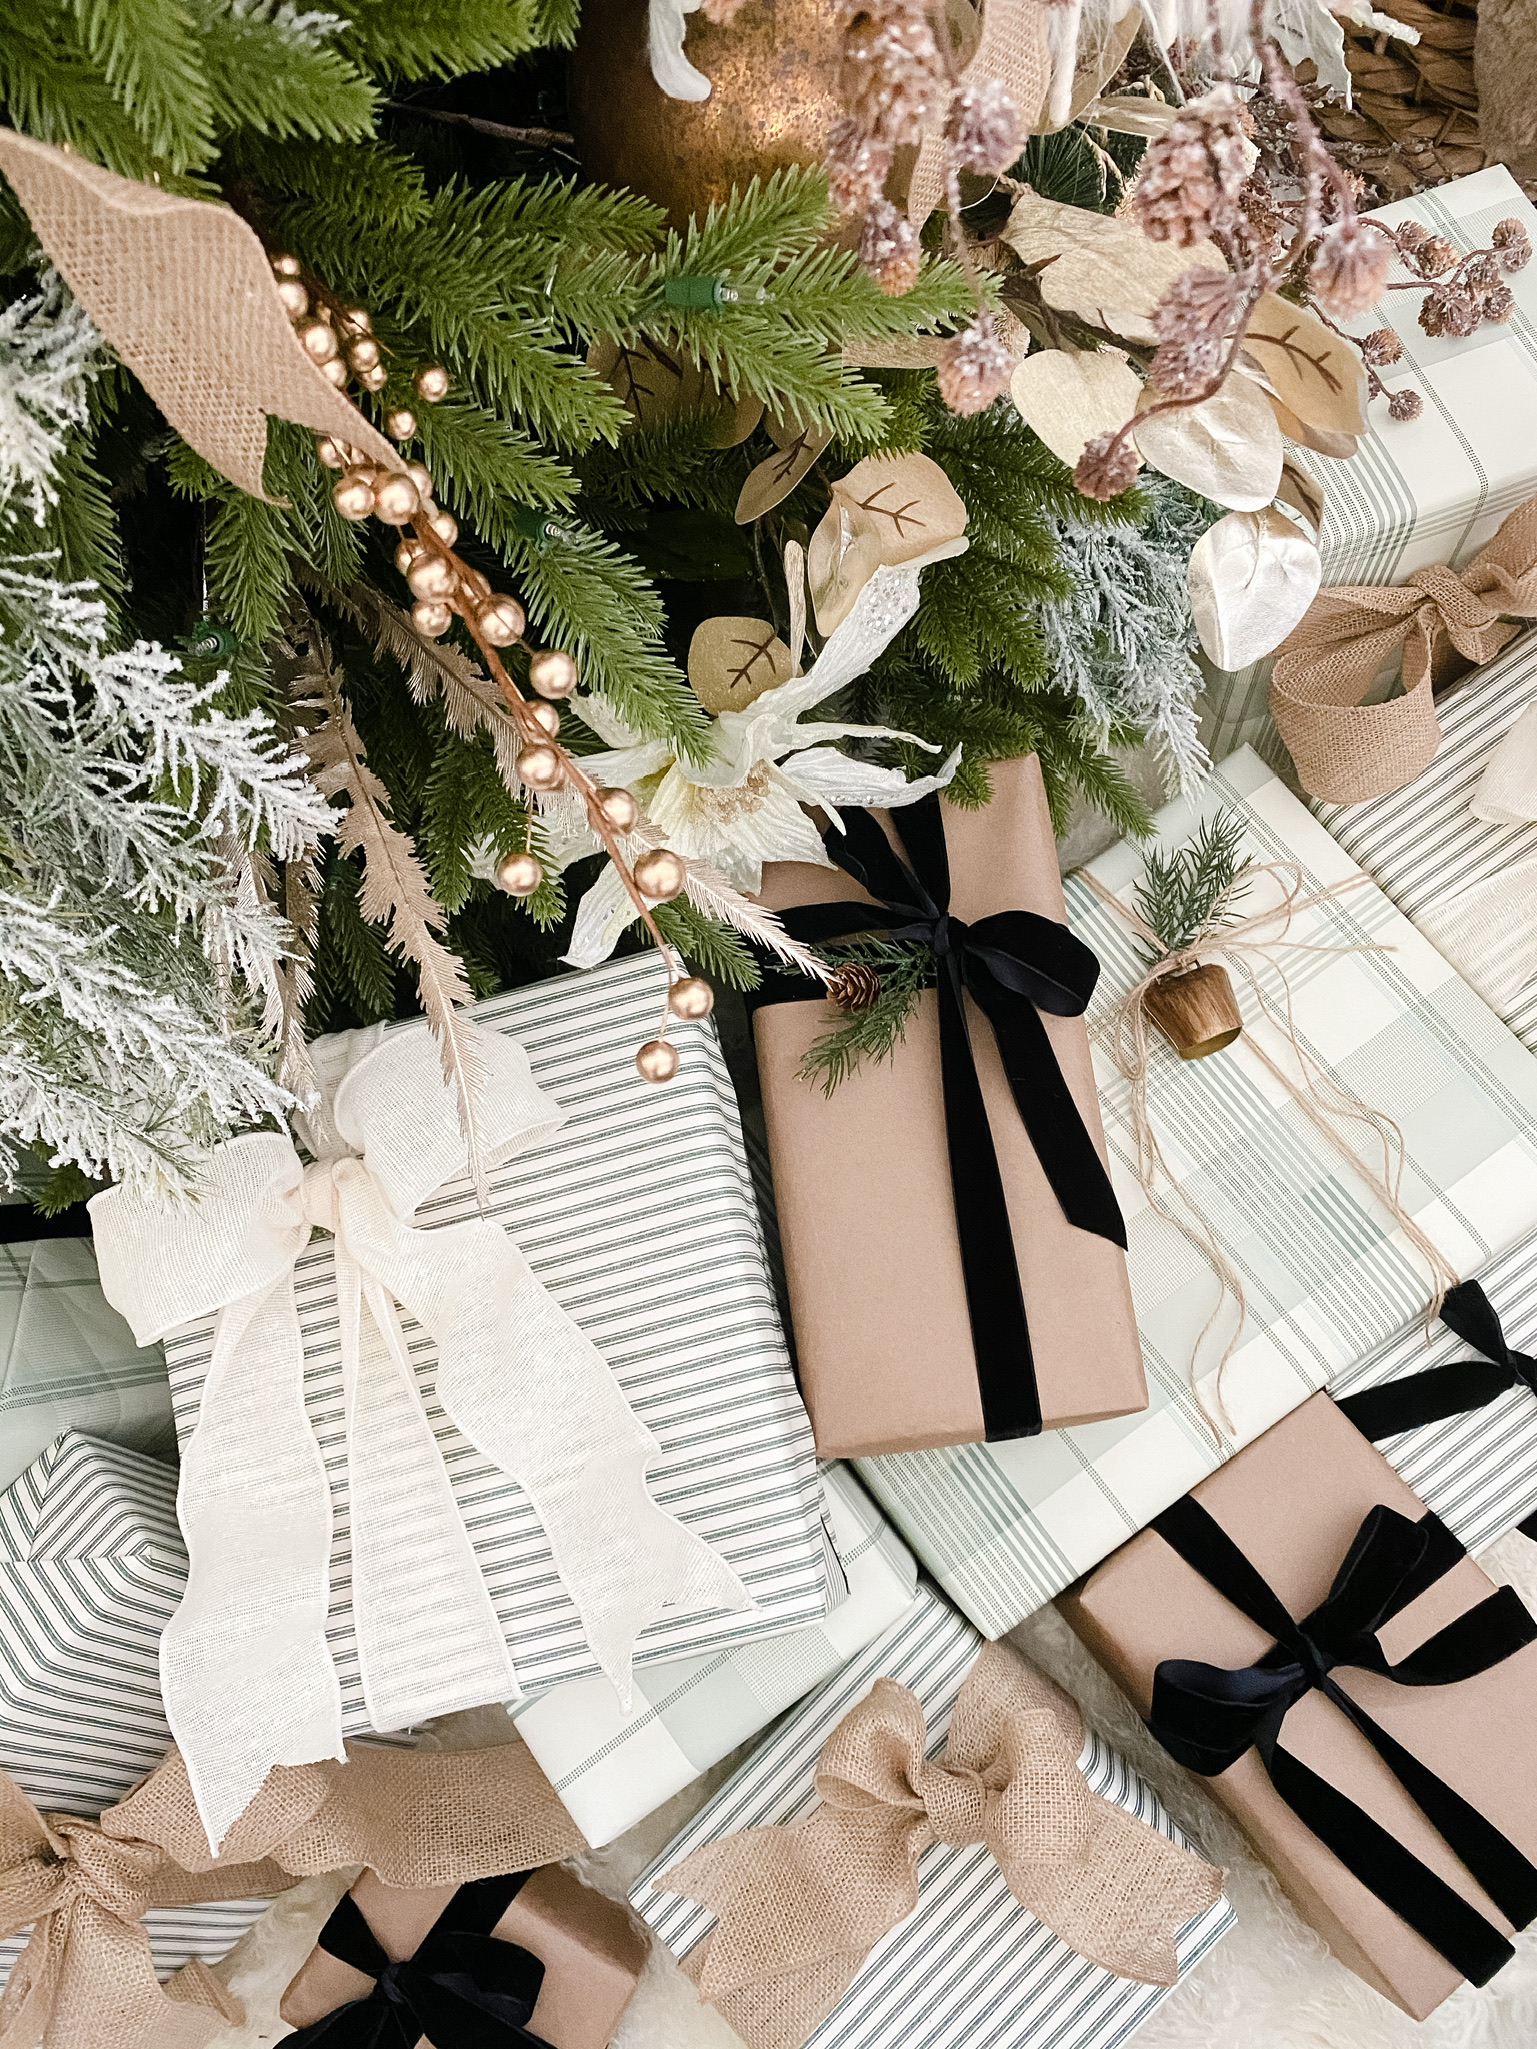 The Secrets to Wrapping Gifts Like An Elf